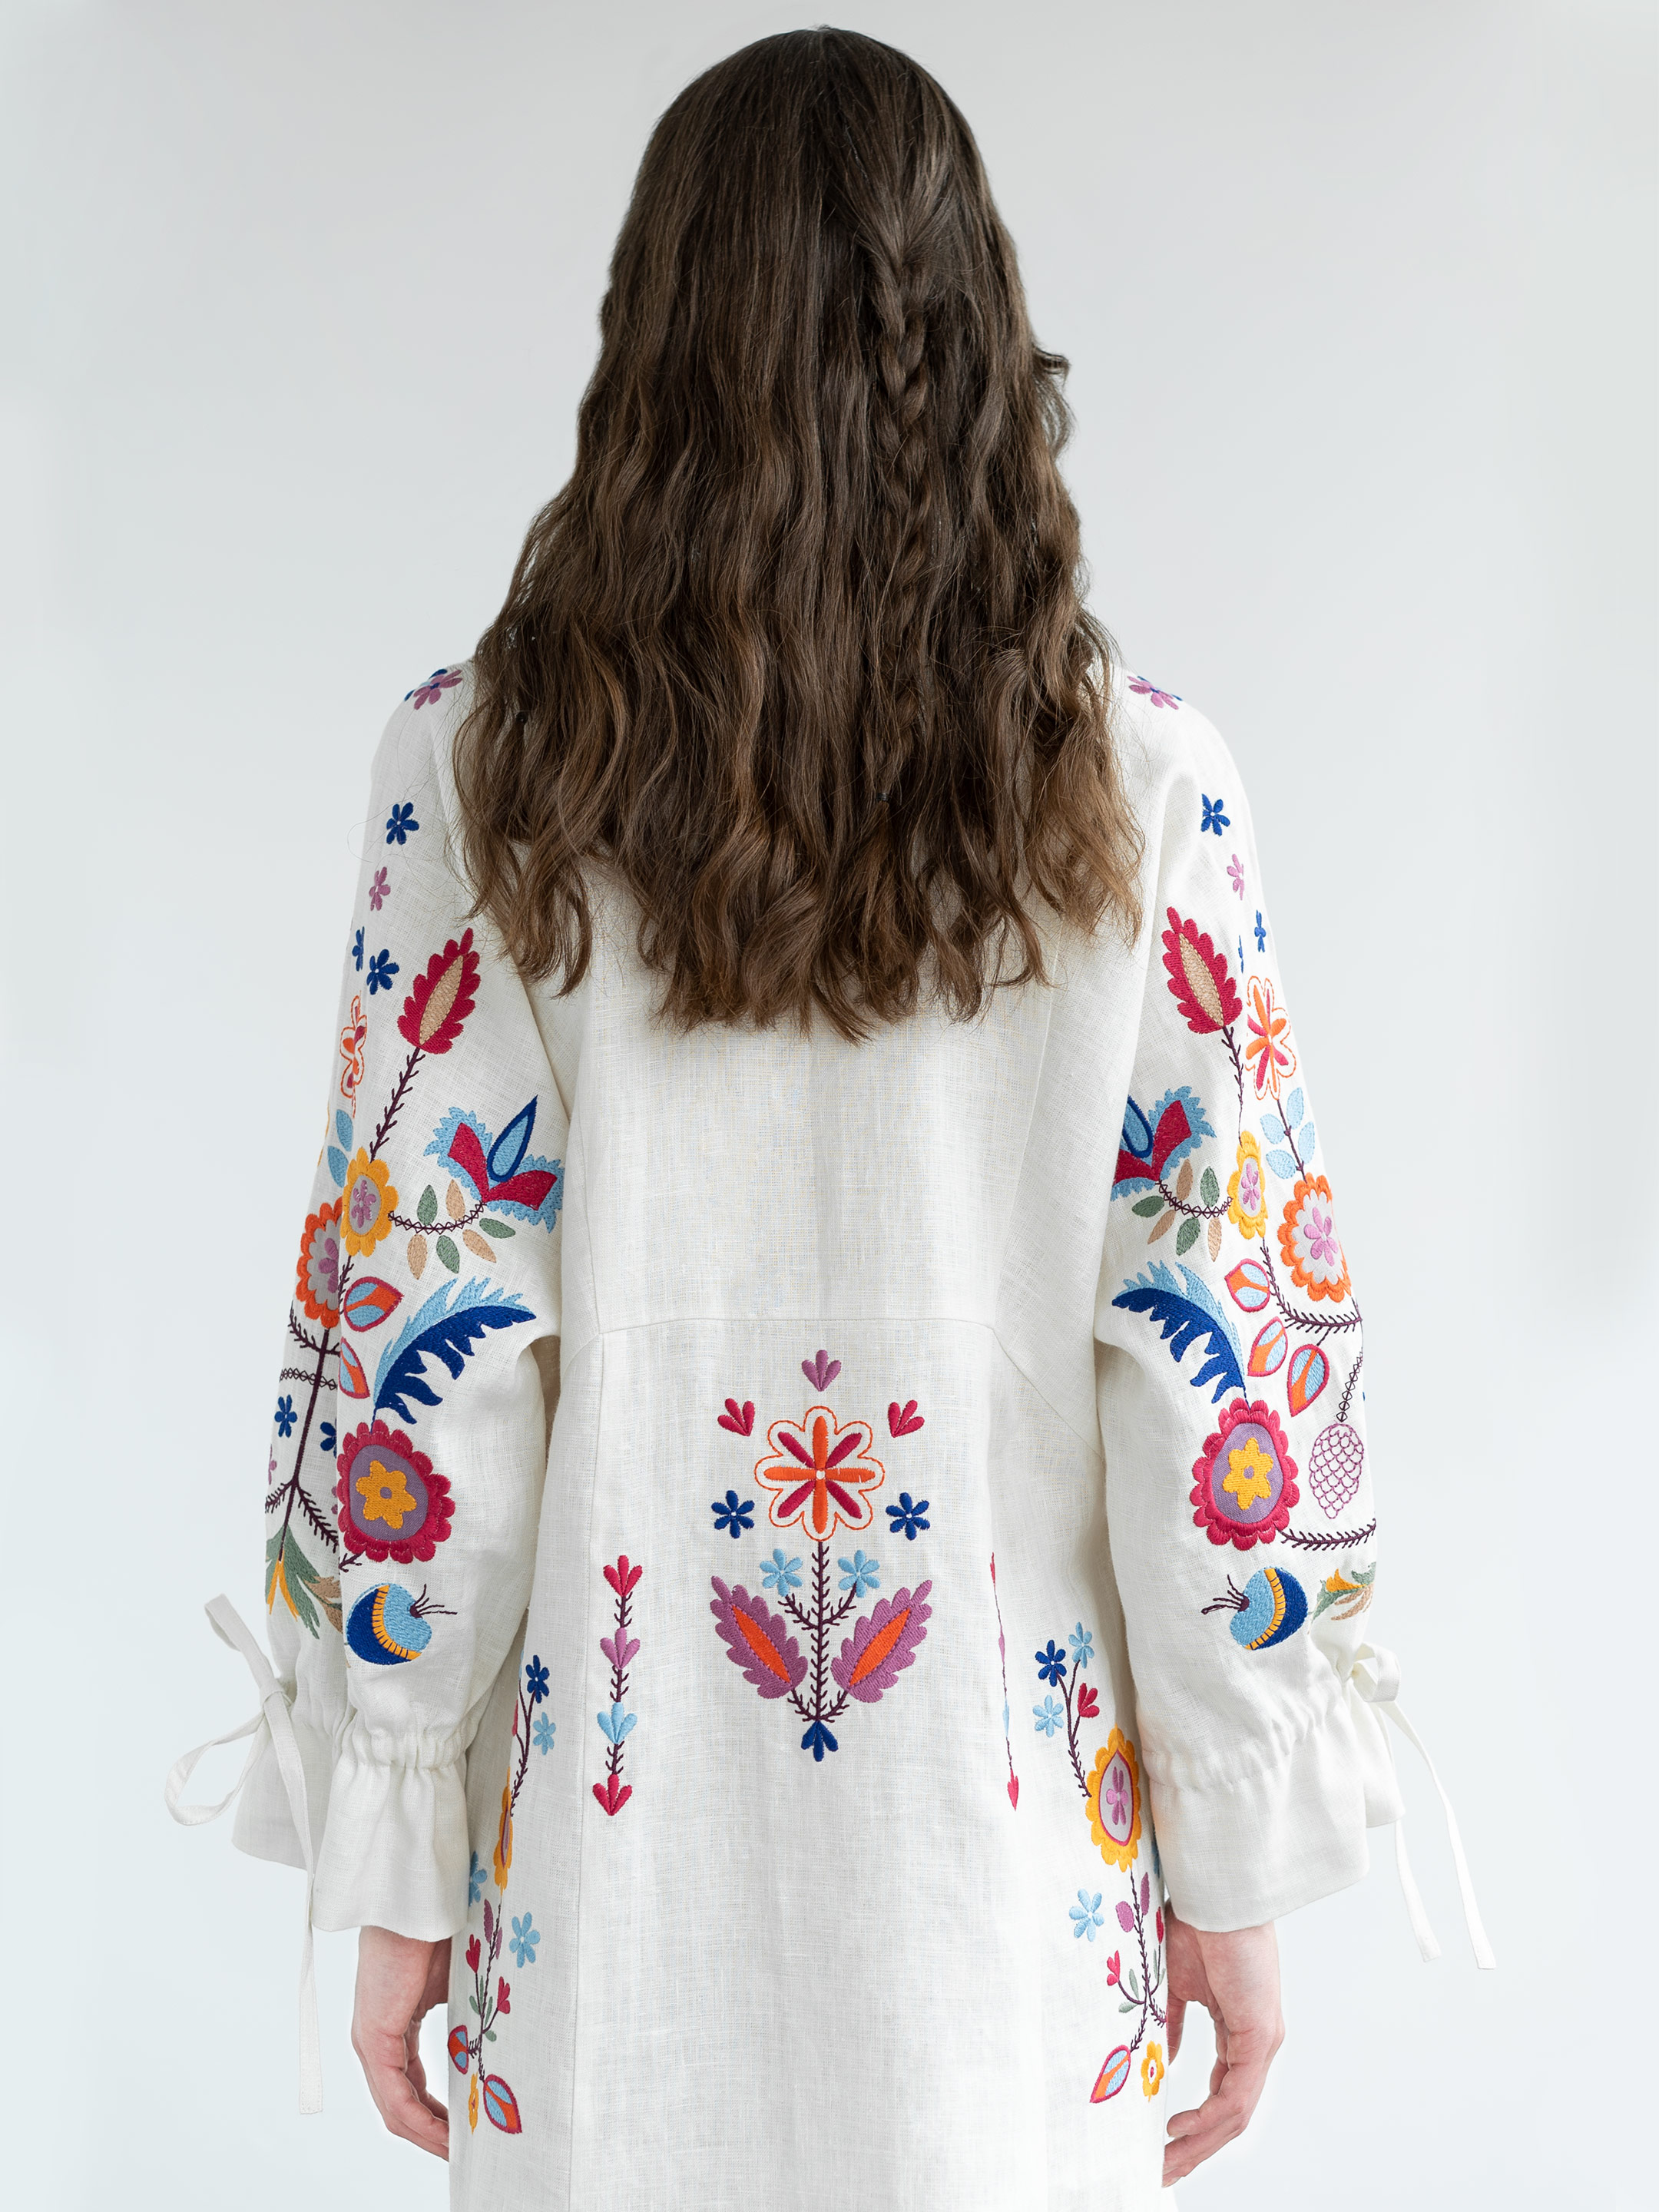 White linen dress with floral embroidery Sobachko - photo 2